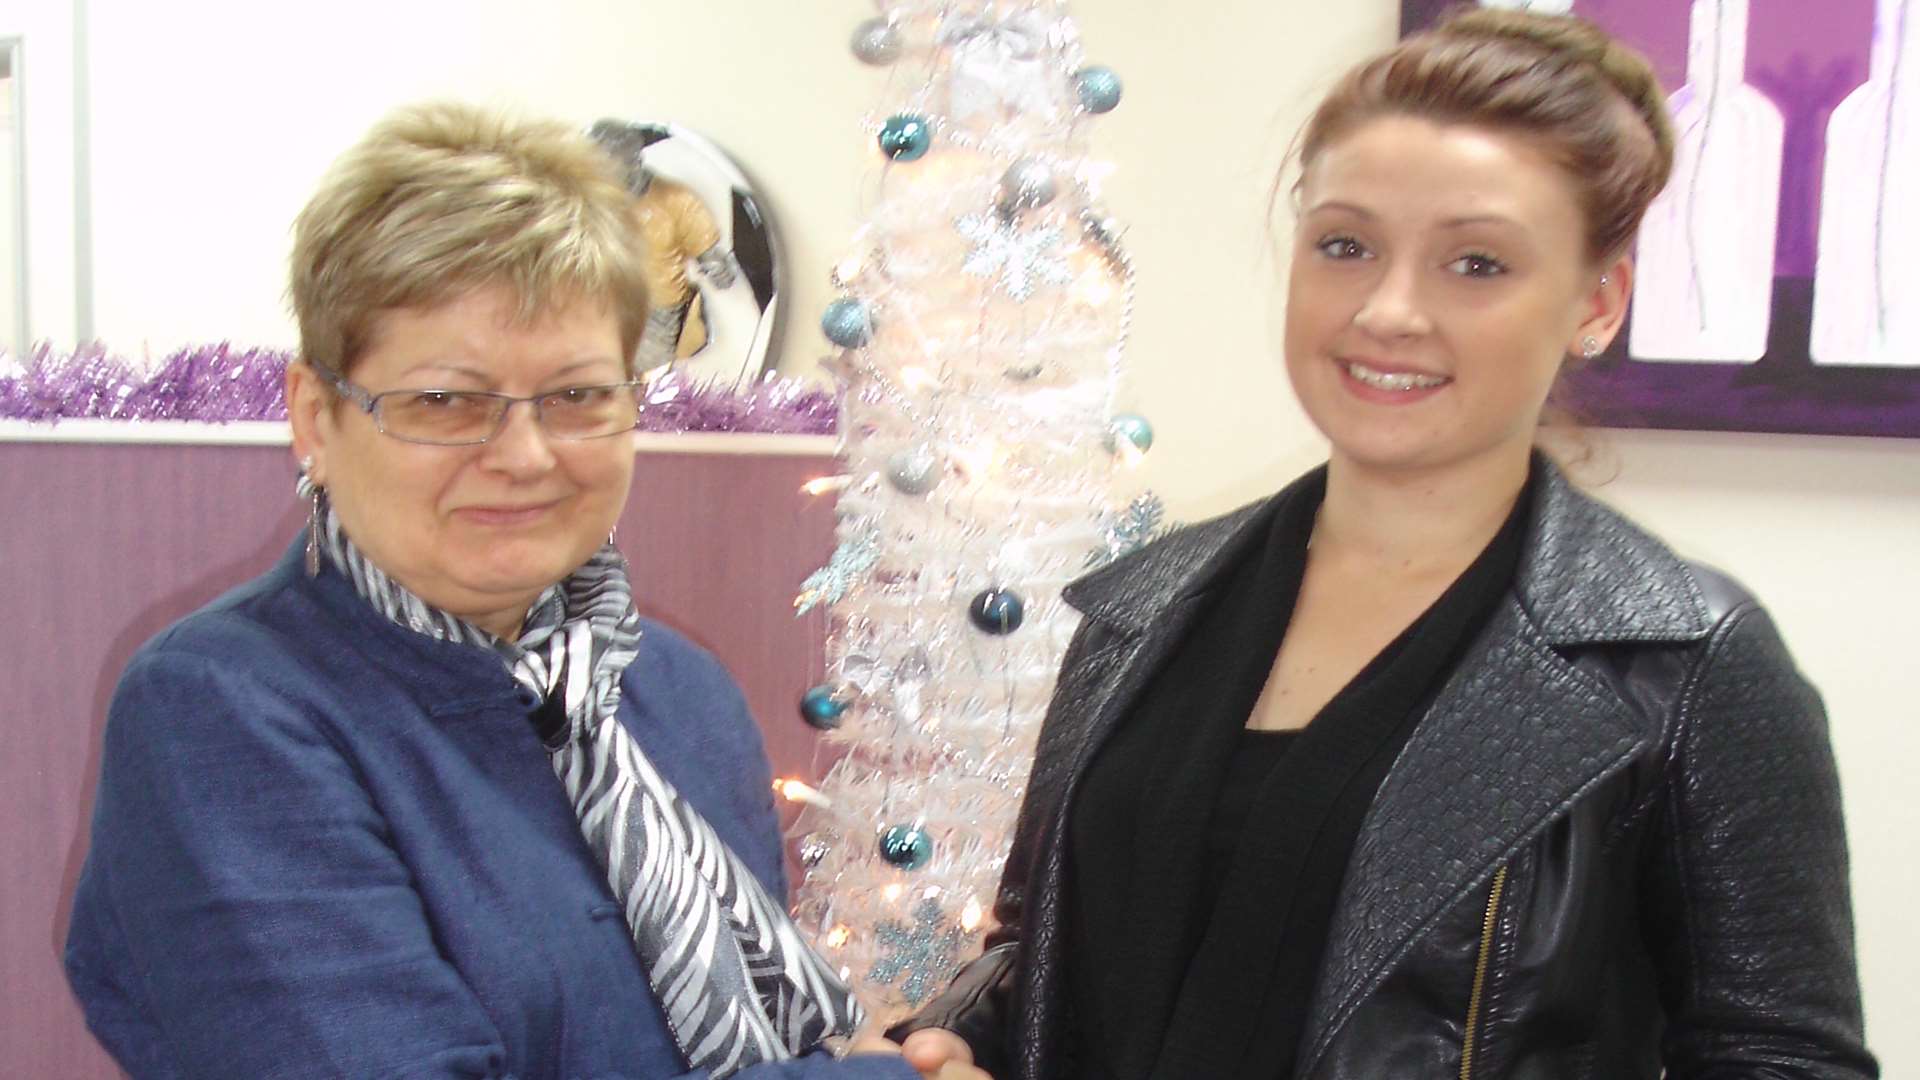 Holly Diamond receives her prize from County Square manager Frances Burt